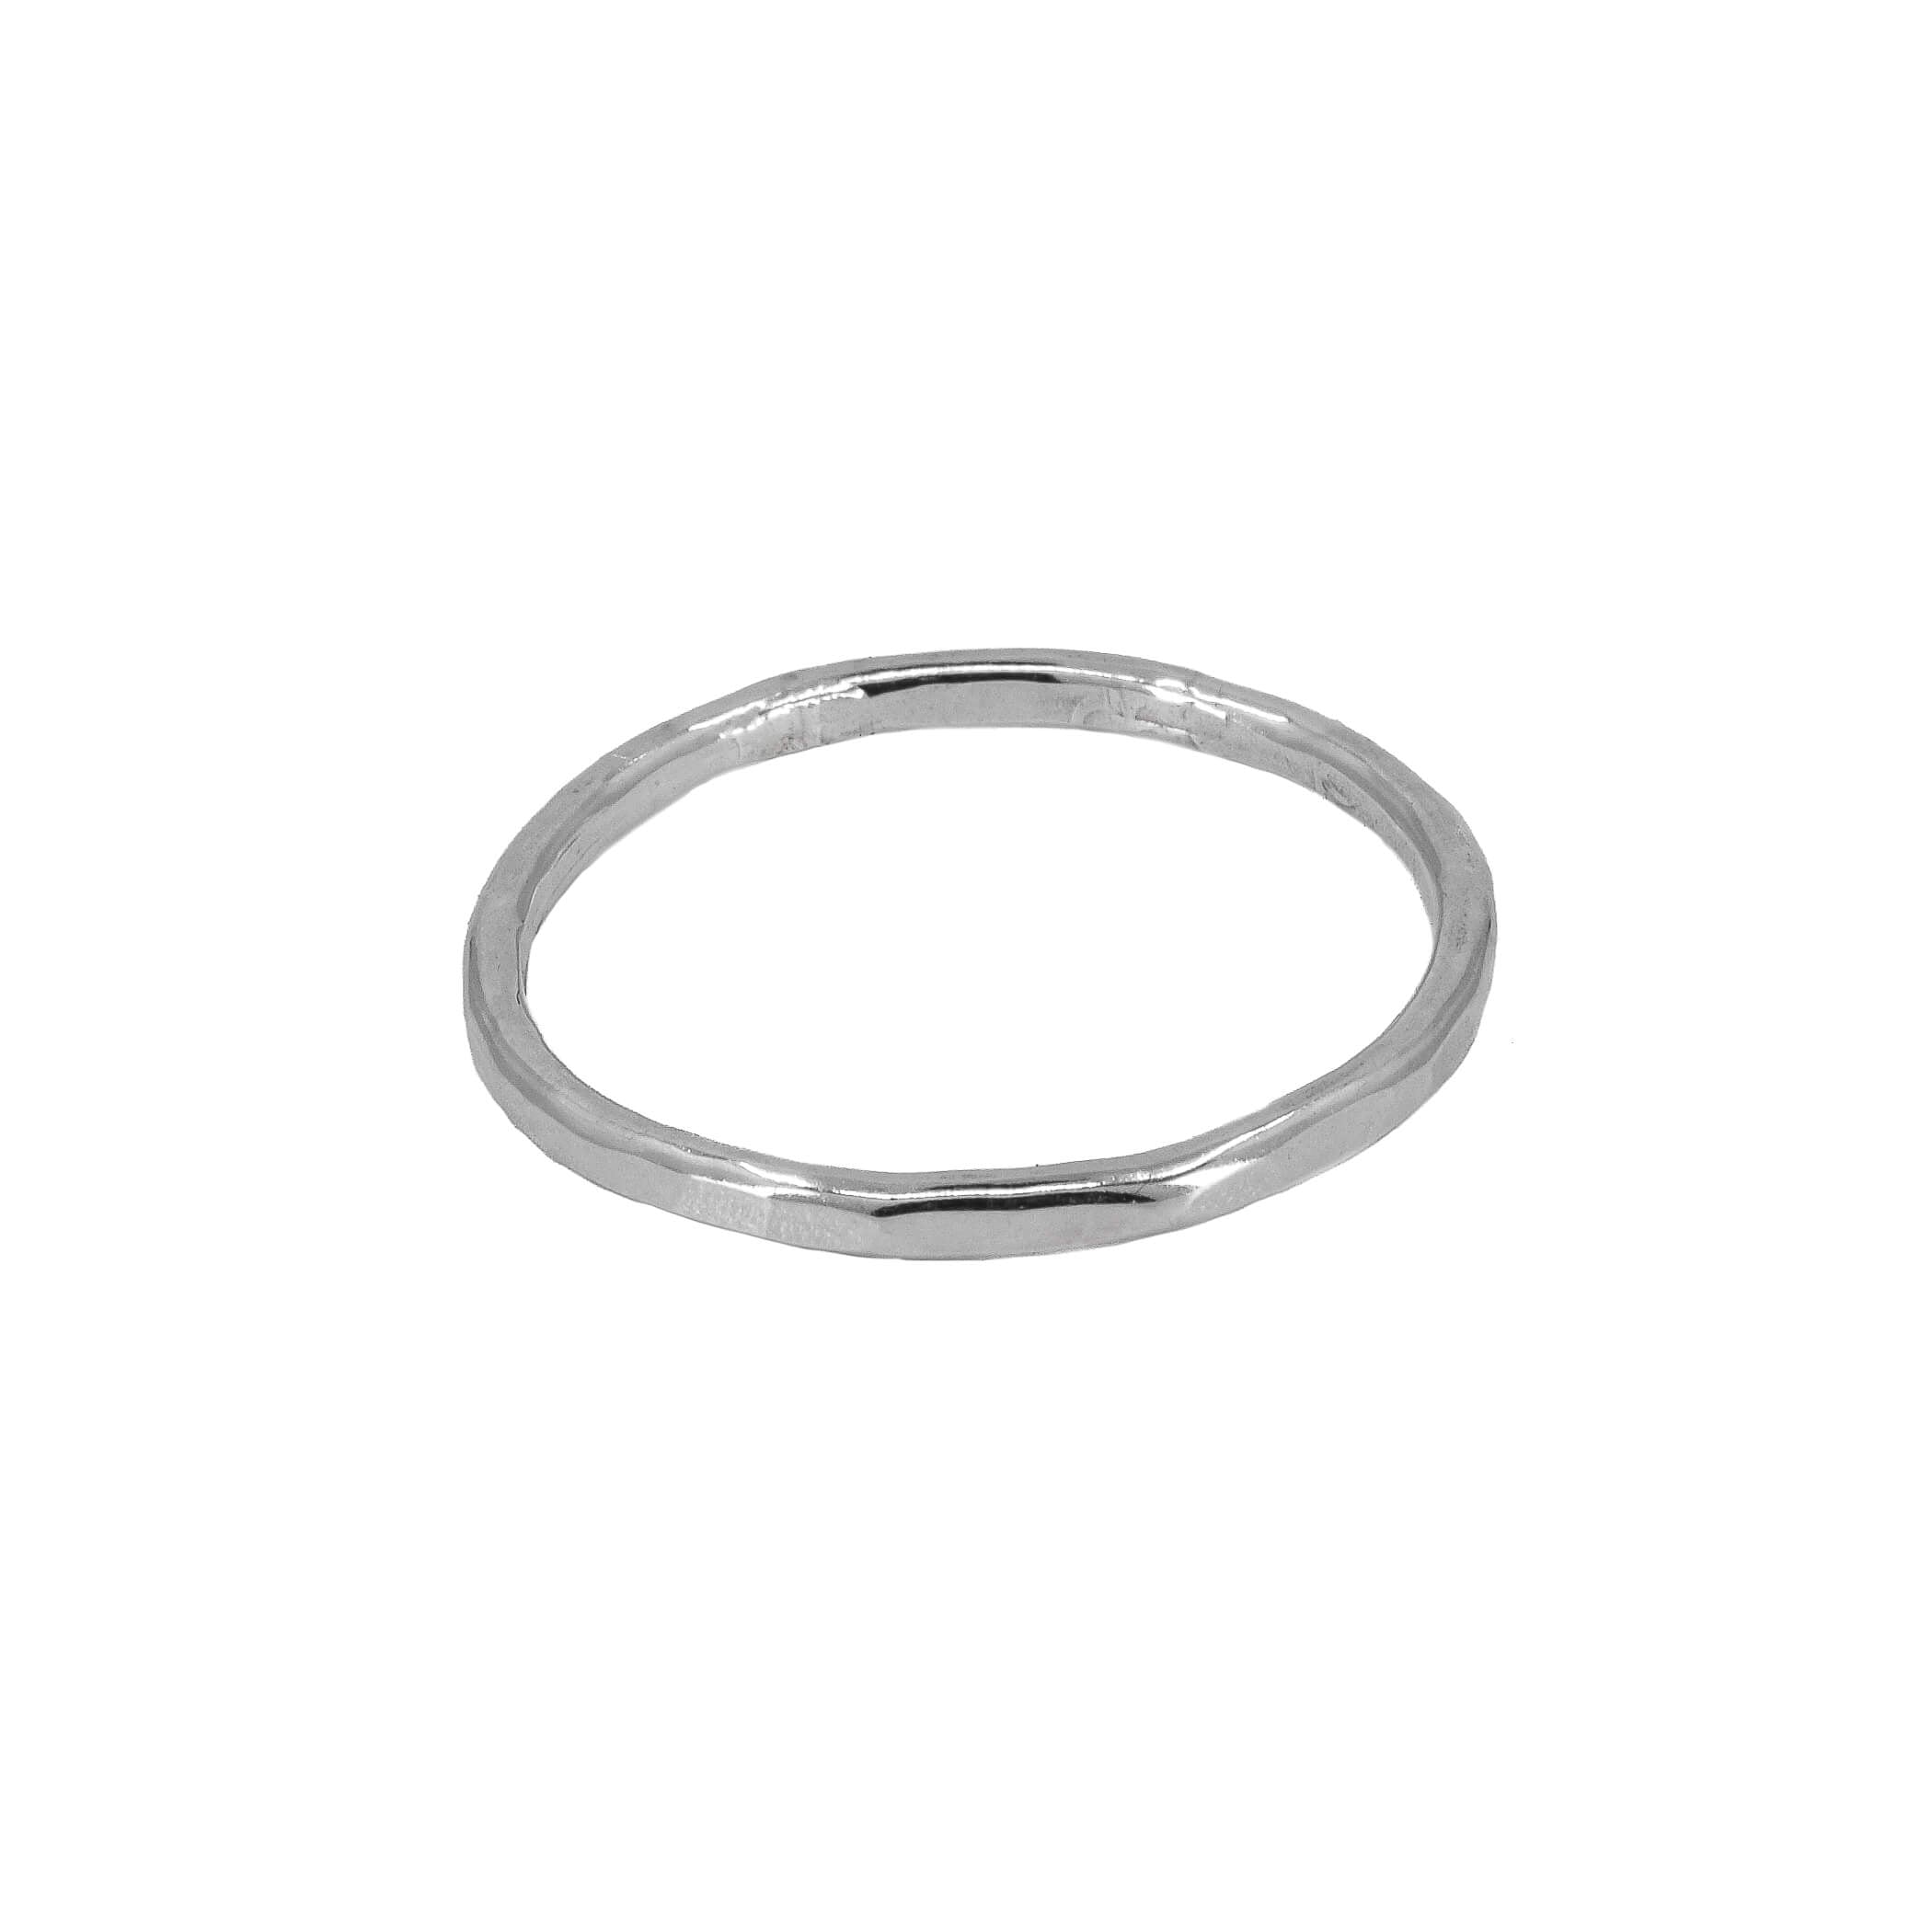 Thin faceted sterling silver stacking ring band